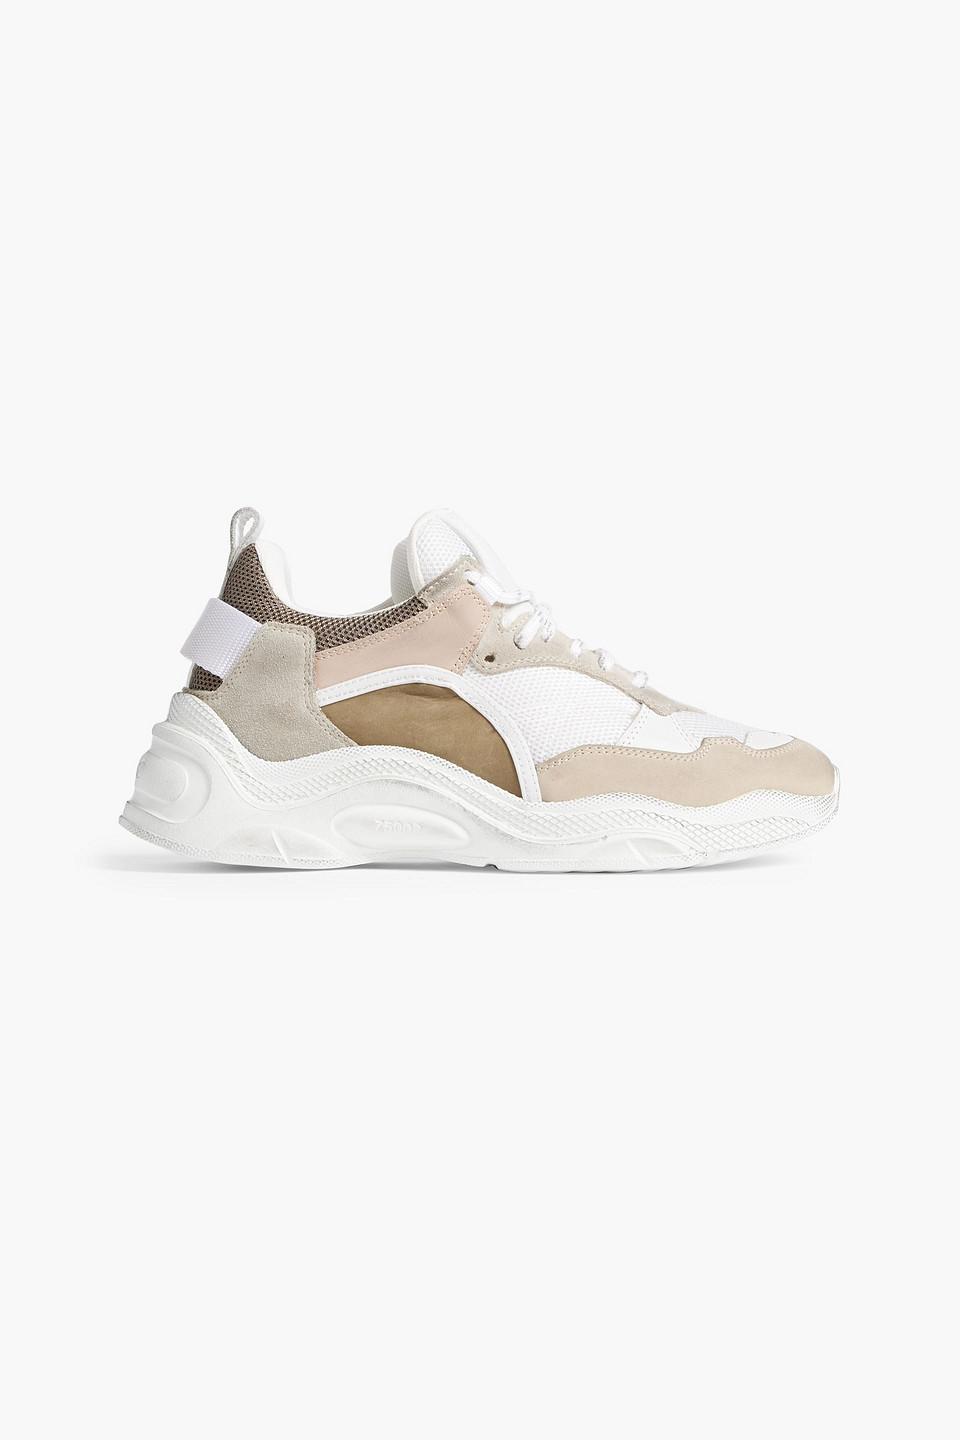 IRO Curverunner Distressed Leather, Suede And Mesh Sneakers | Lyst